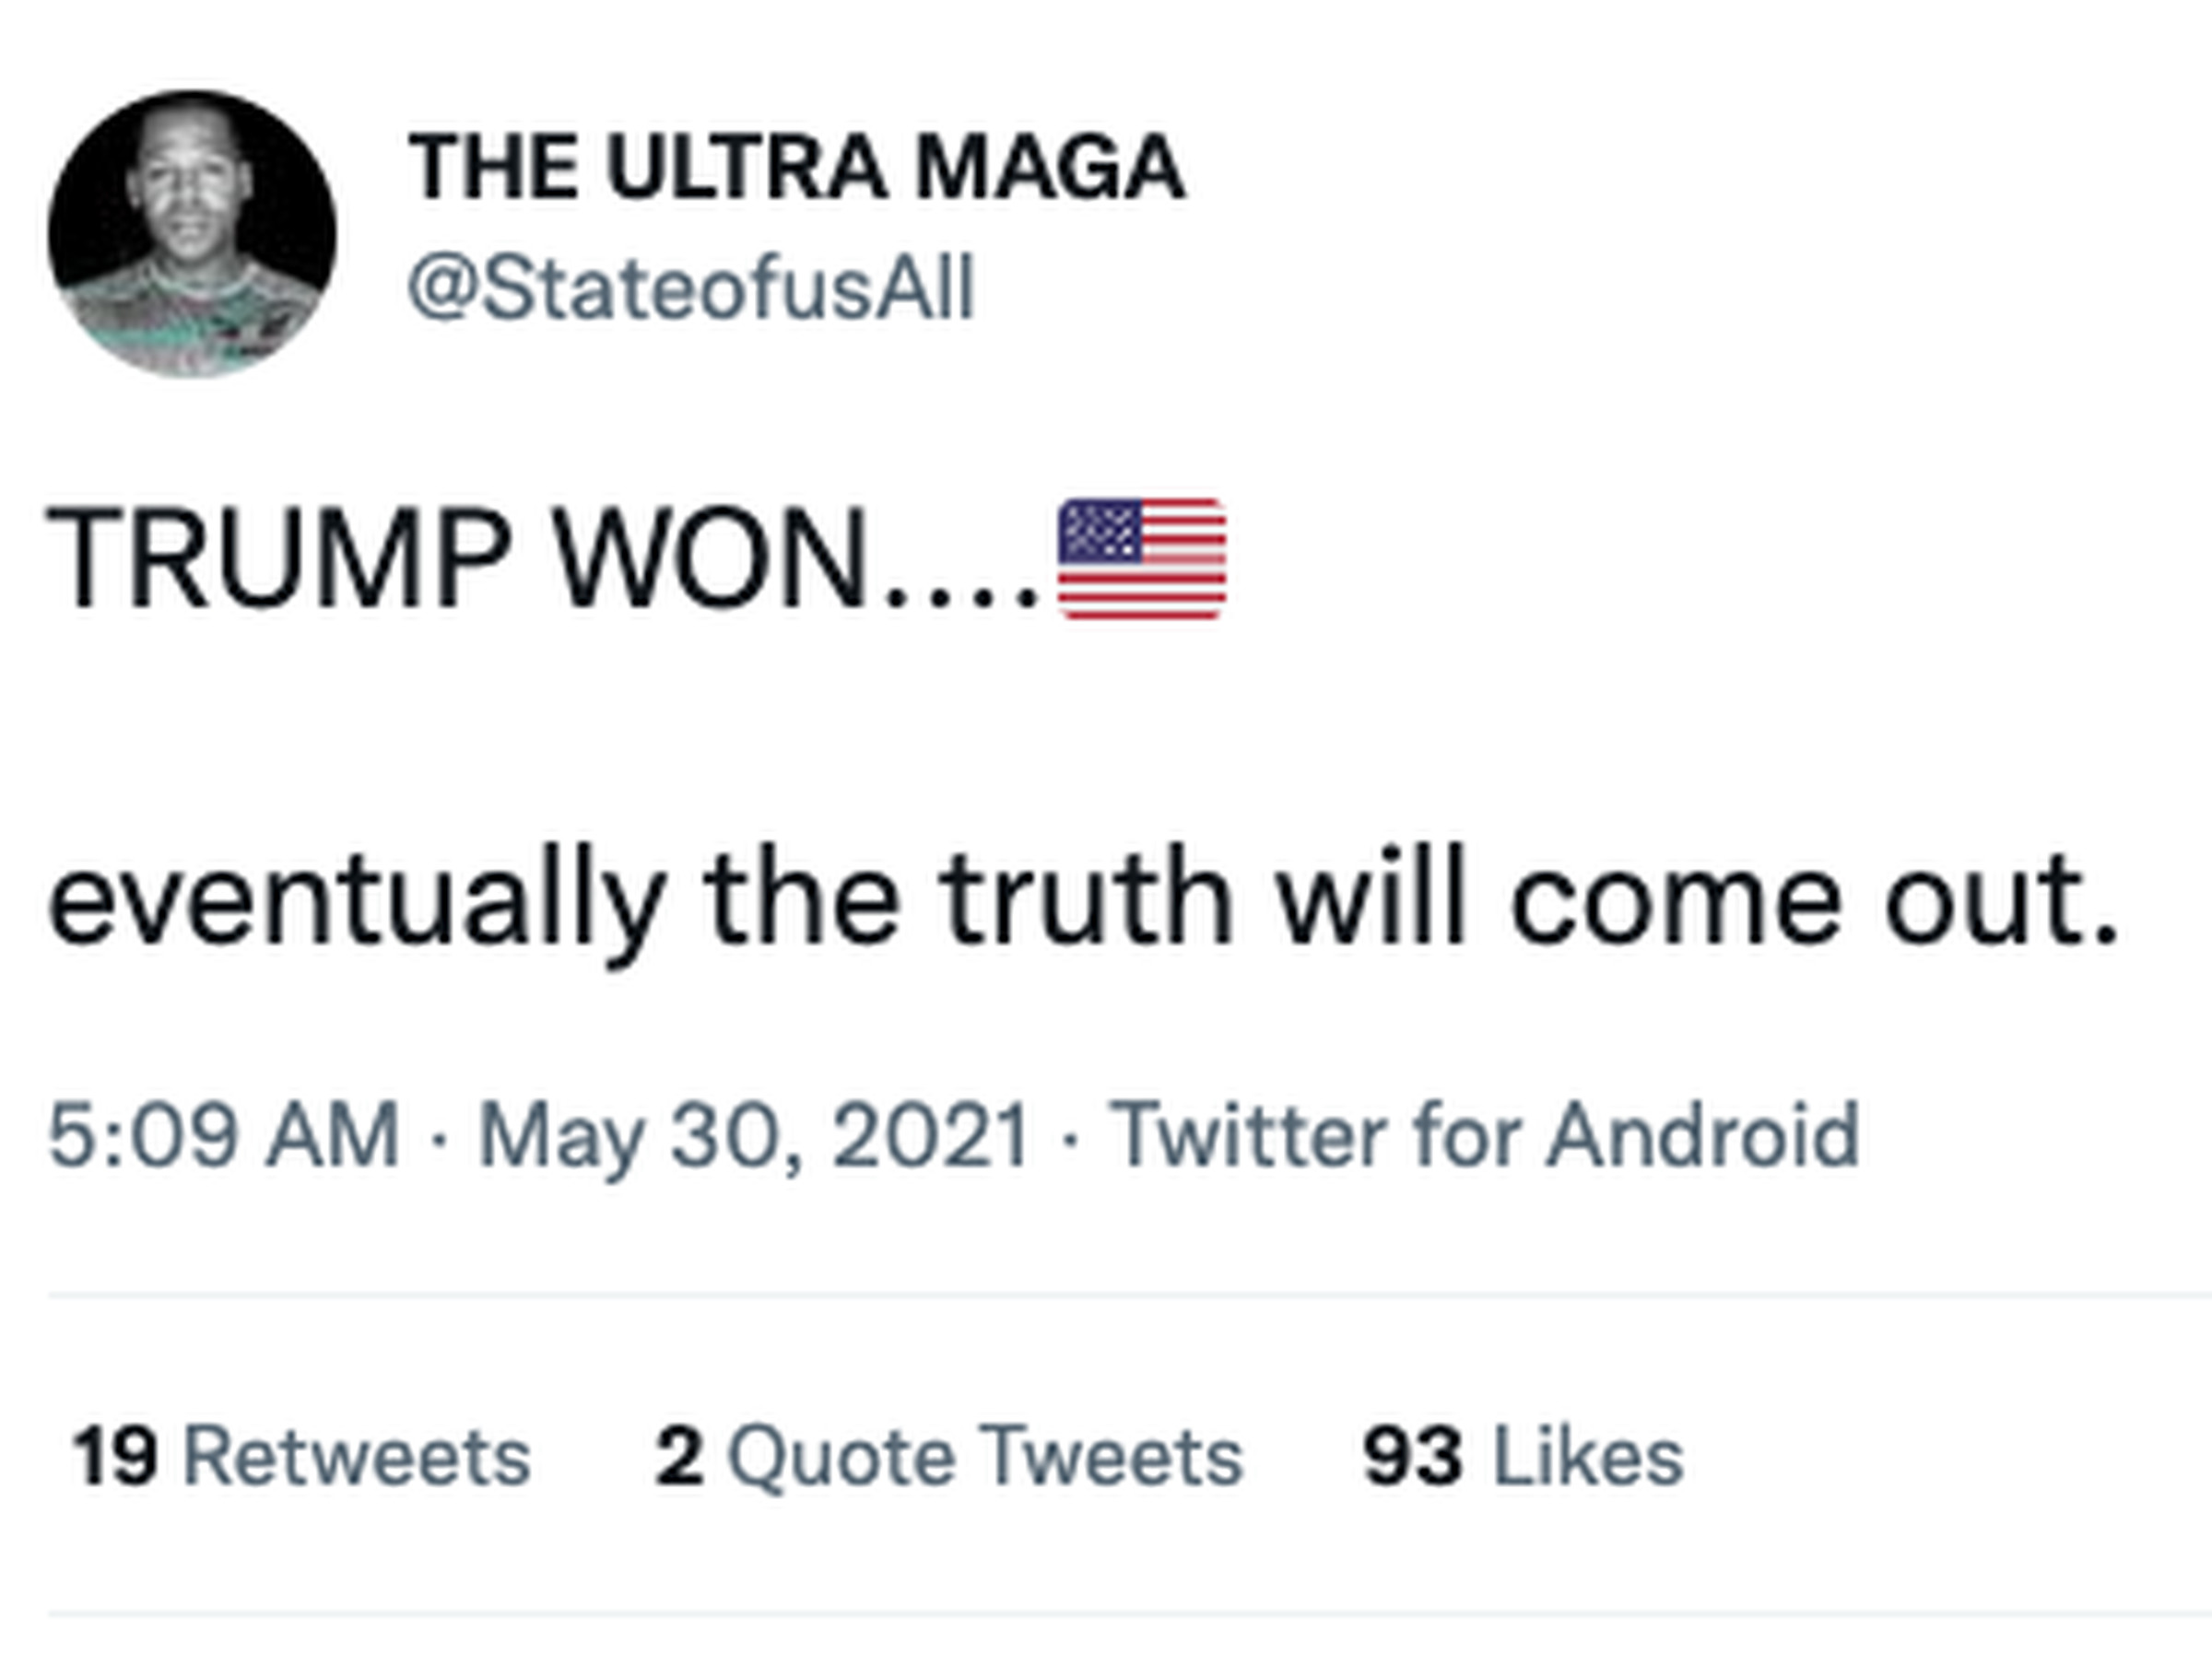 Screenshot of a tweet from @StateofusAll reading: “TRUMP WON....  eventually the truth will come out.”